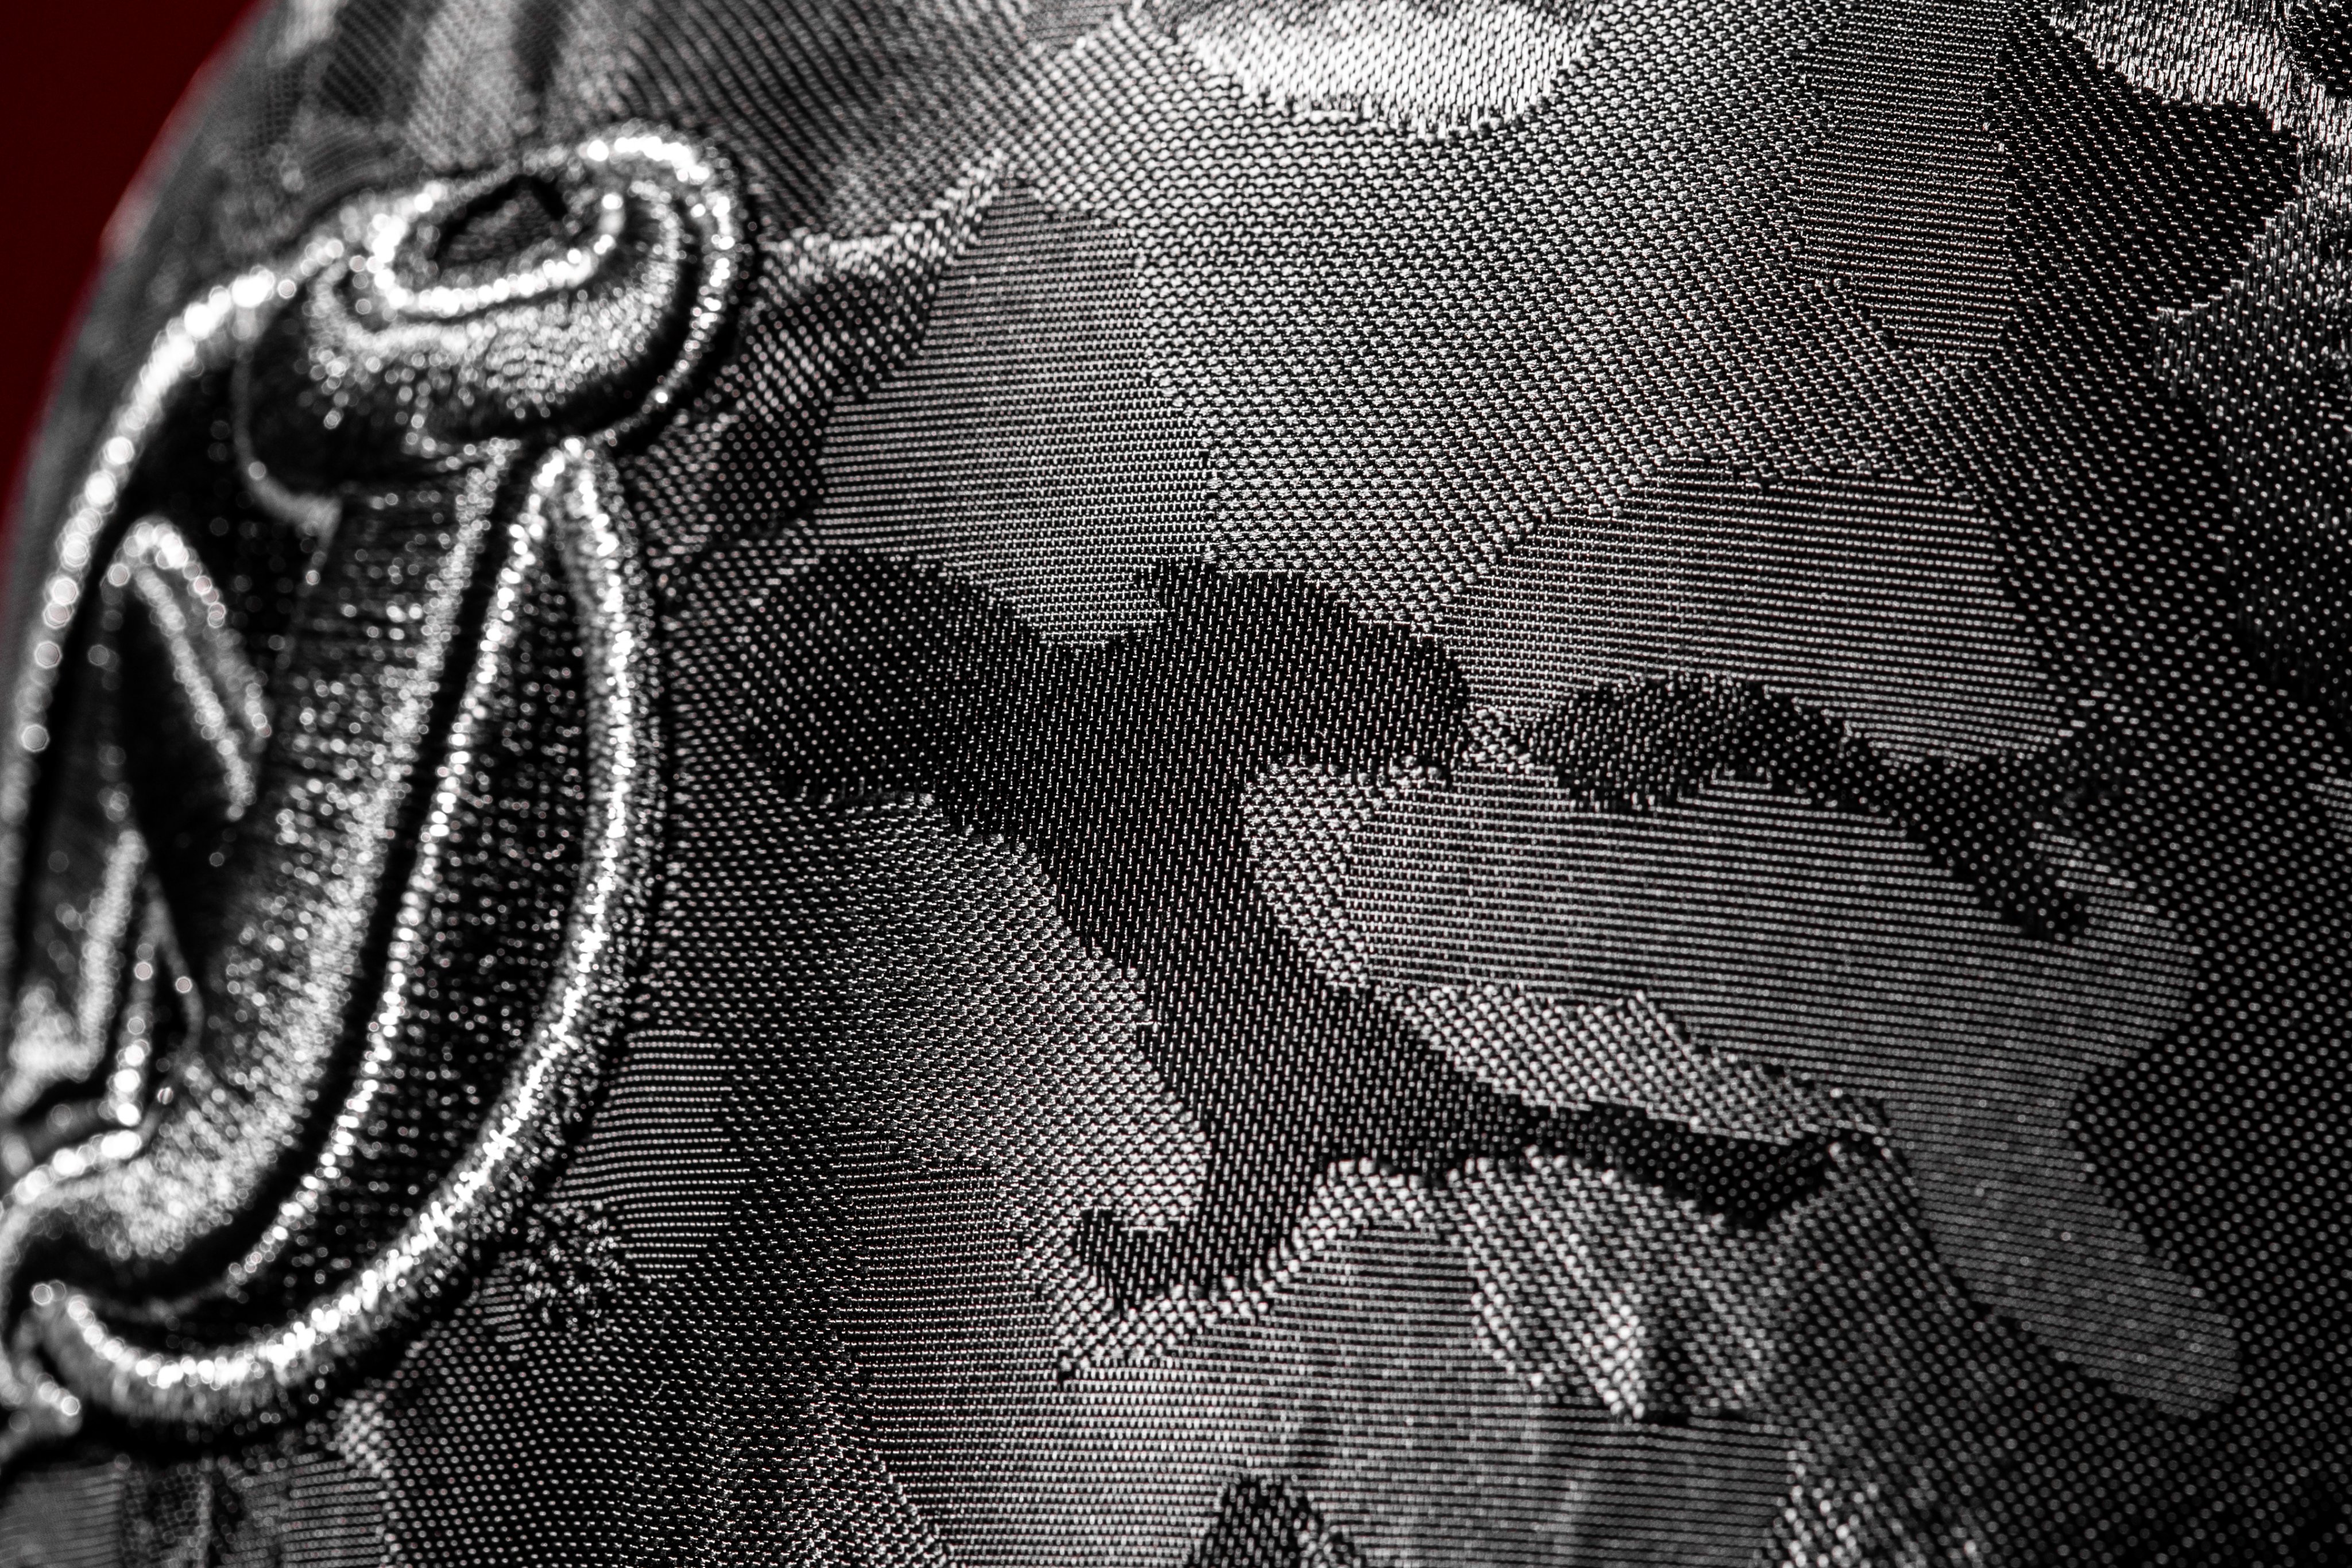 New Jersey Devils - Want a Devils camouflage jersey from our upcoming  Military Appreciation Night? Here's your chance, presented by Prudential!  ENTER NOW